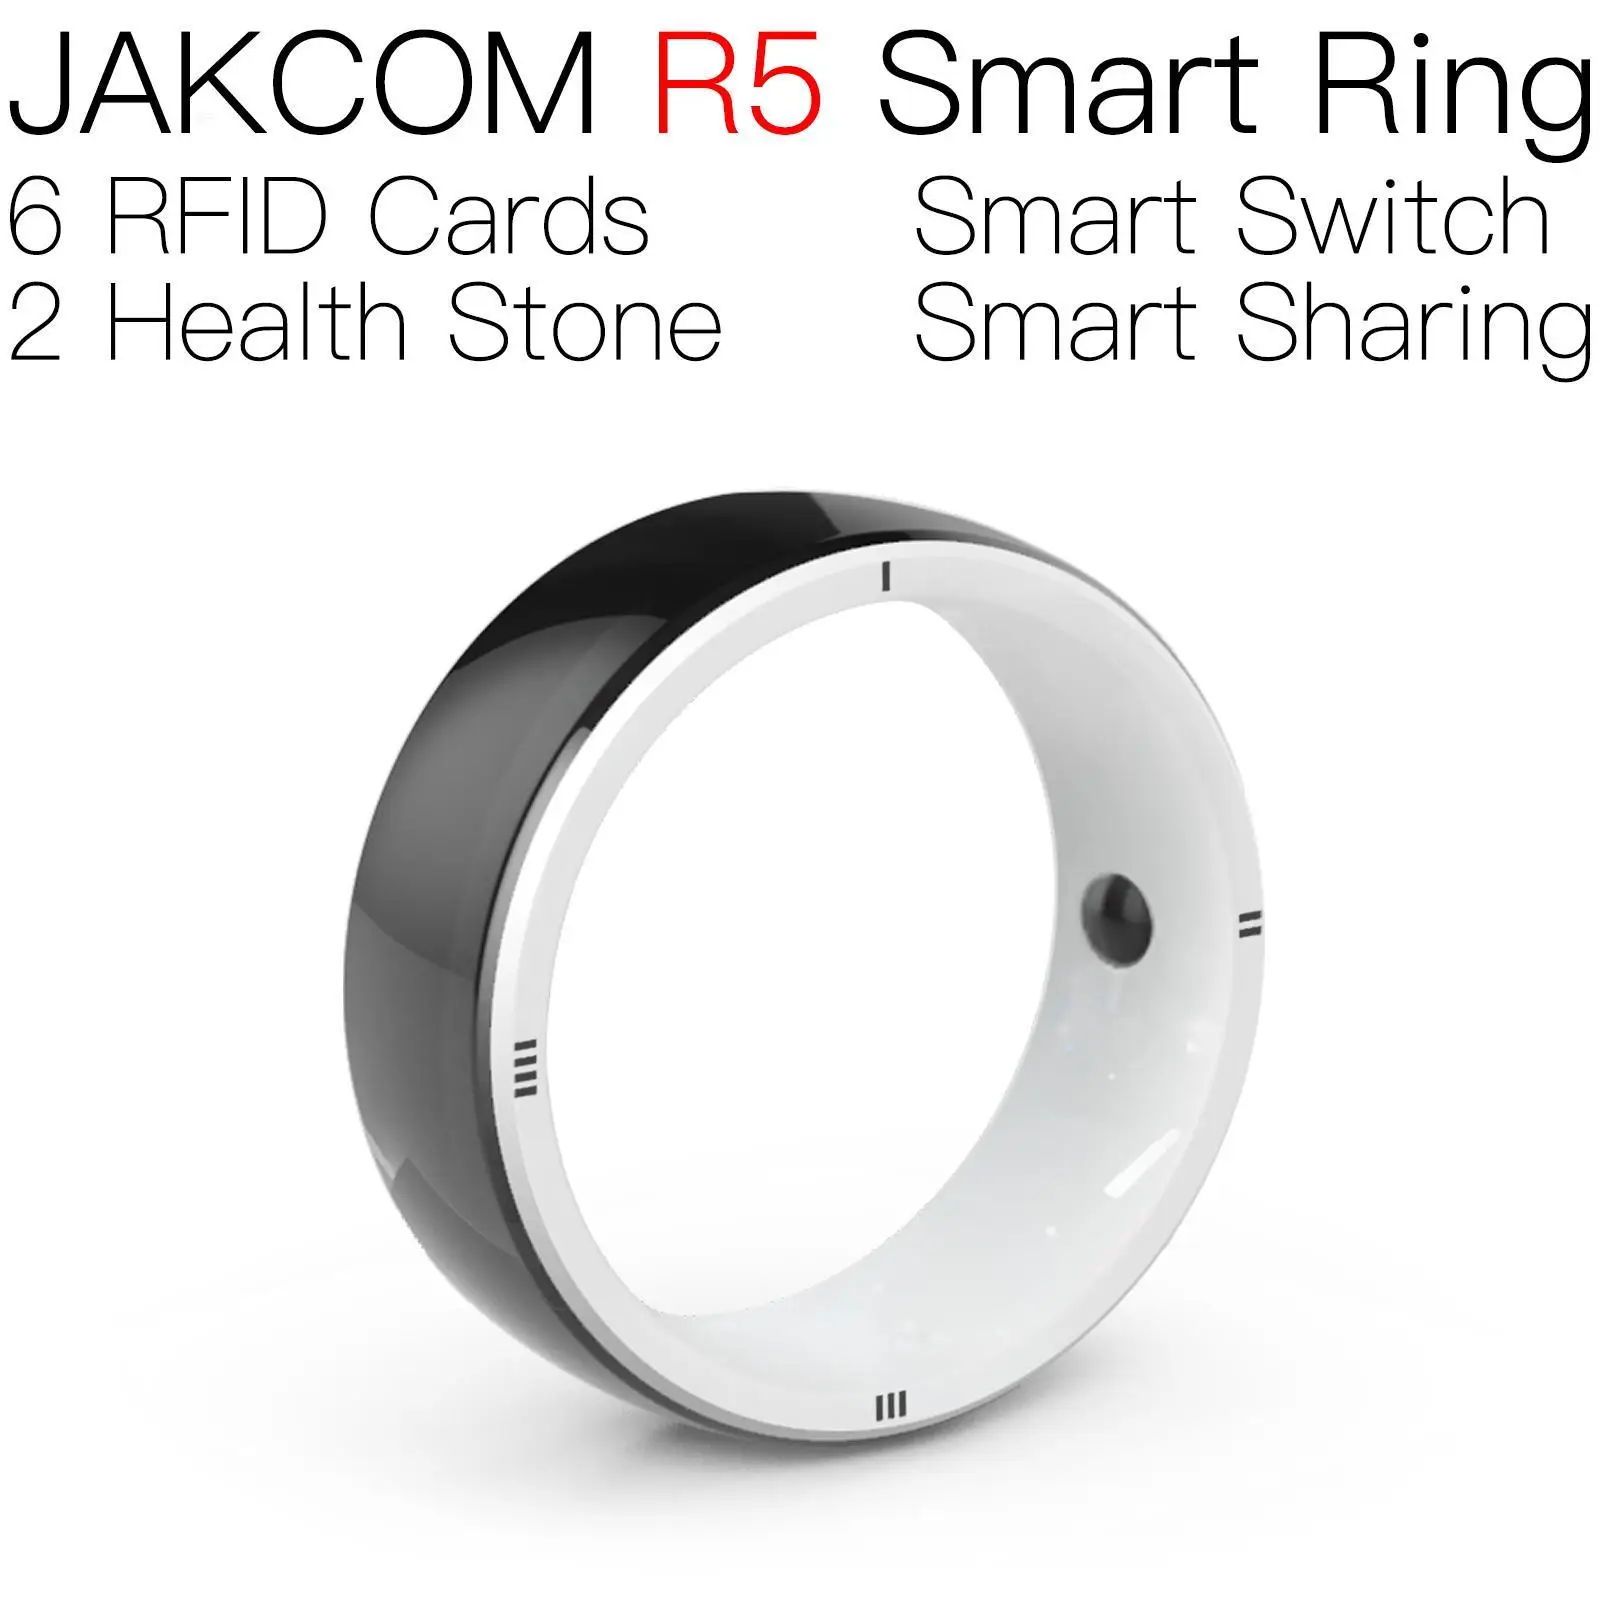 

JAKCOM R5 Smart Ring Nice than nfc card 100pcs cadillac cusion tags programmable android chip for smart key tag id flipper zero